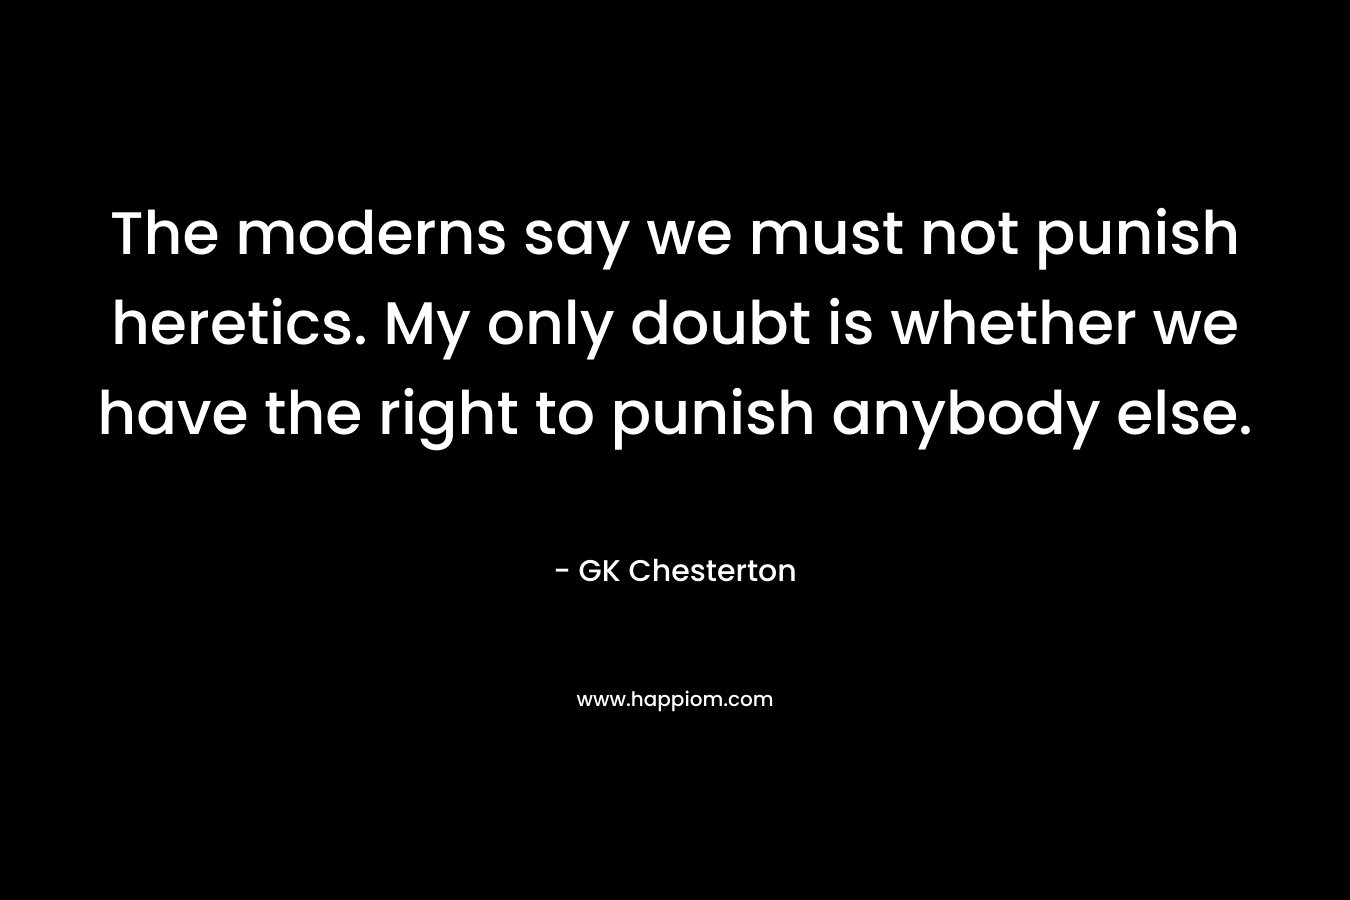 The moderns say we must not punish heretics. My only doubt is whether we have the right to punish anybody else.